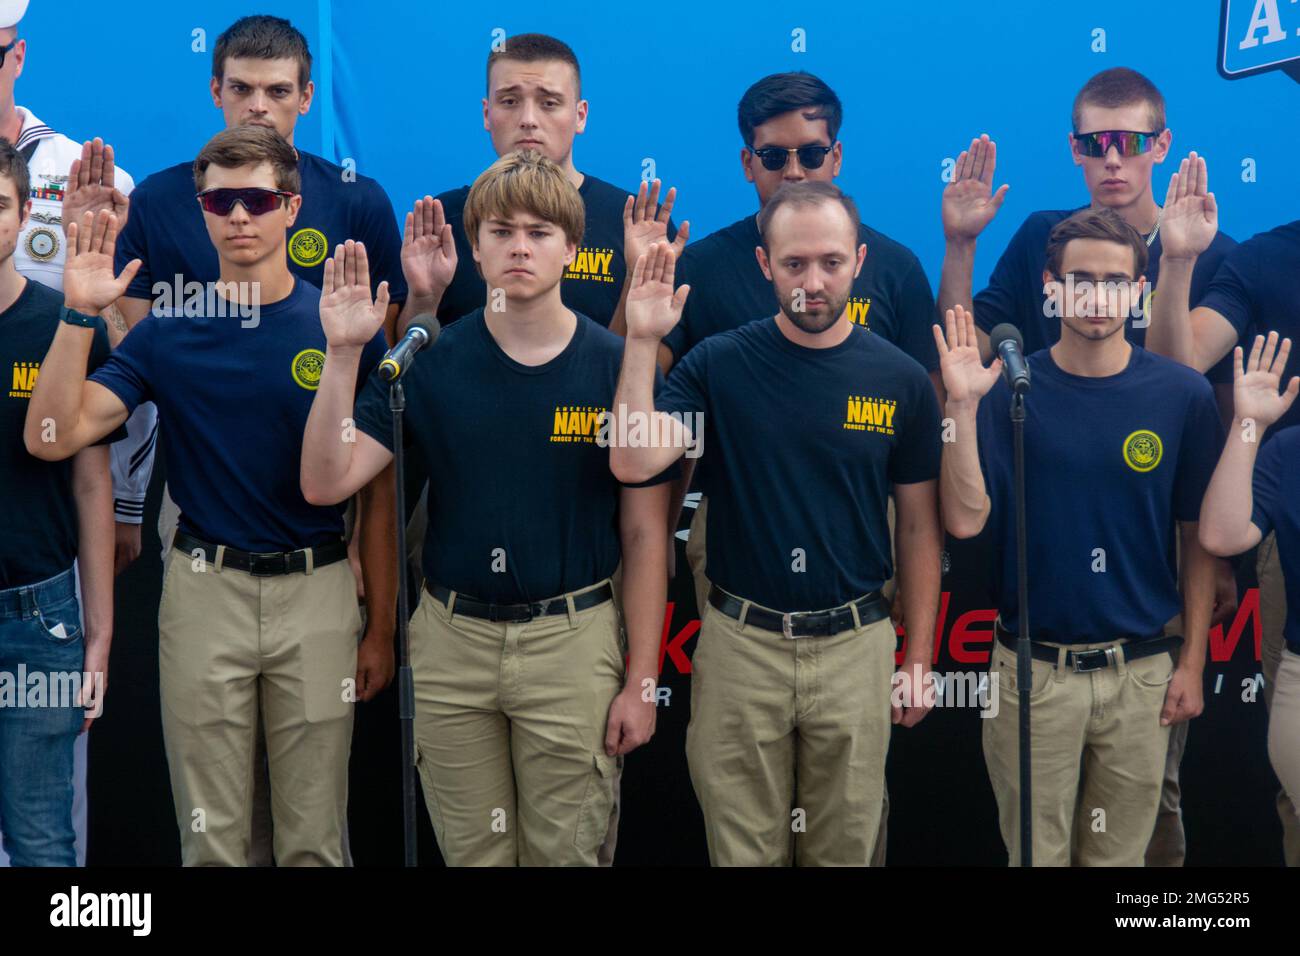 220821-N-RB168-0311 WATKINS GLEN, N.Y. (August 21, 2022) —  Eleven Future Sailors from Navy Talent Acquisition Group (NTAG) Pittsburgh take the oath of enlistment at the Go Bowling at the Watkins Glen NASCAR Xfinity Series race. Cmdr. Christopher McCurry, from Aloha, Ore., administered the oath. NTAG Pittsburgh, part of Navy Recruiting Command, recruits the next generation of Navy Sailors throughout areas in Pennsylvania, New York, West Virginia, and Maryland. Stock Photo